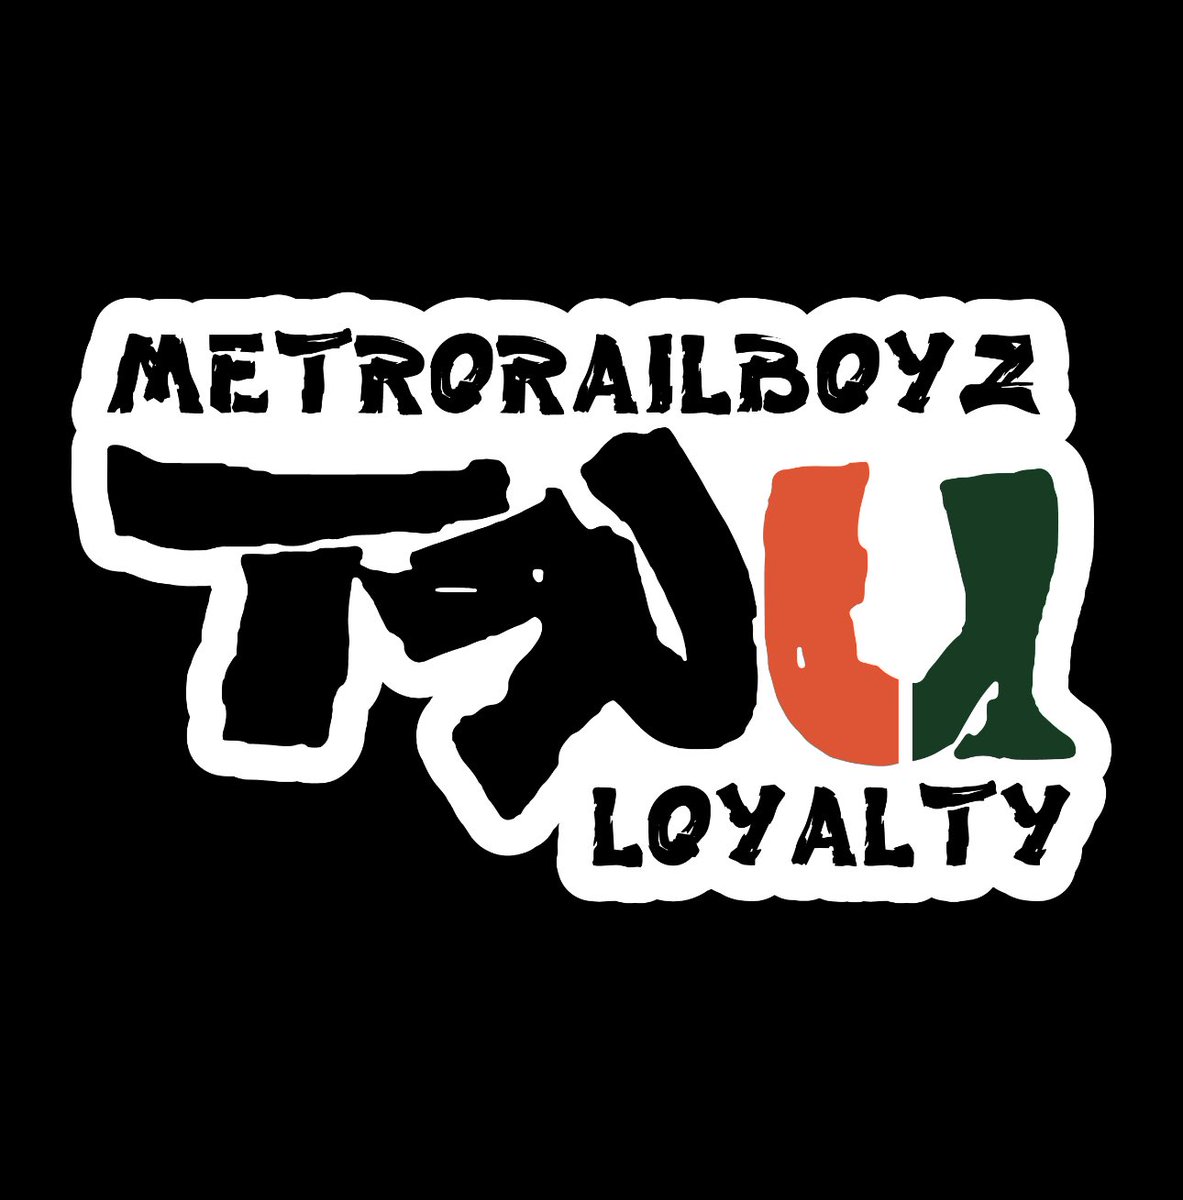 Be #Loyal in your community, loyal in friendship, and loyal to yourself and your beliefs #MetroRailBoyz™️ TRU #Loyaty